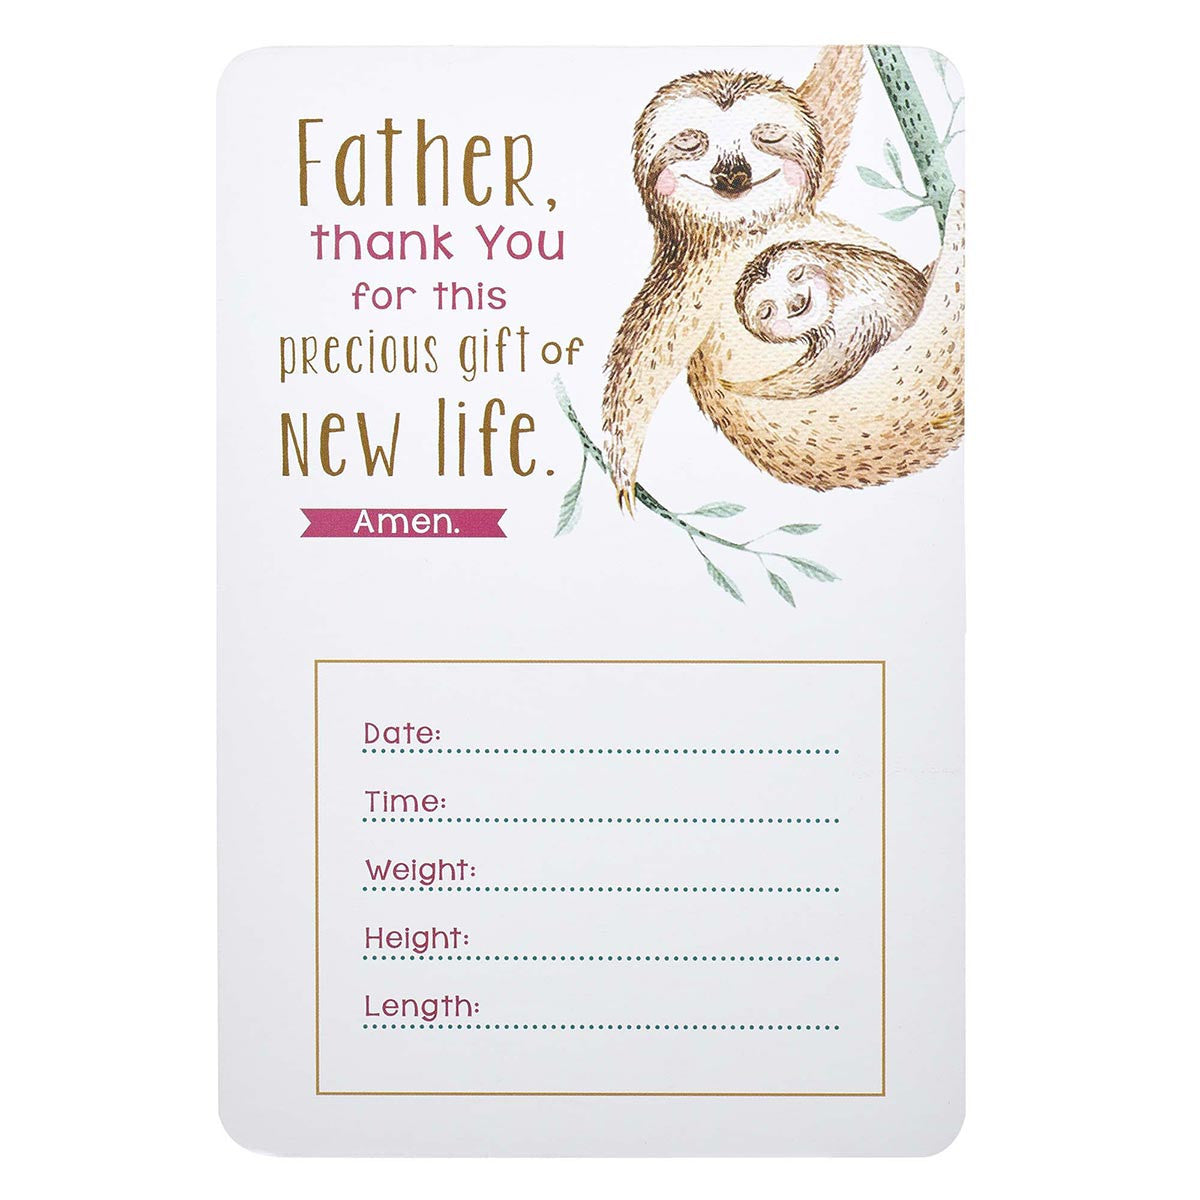 My Baby Girl's Milestone Cards - The Christian Gift Company